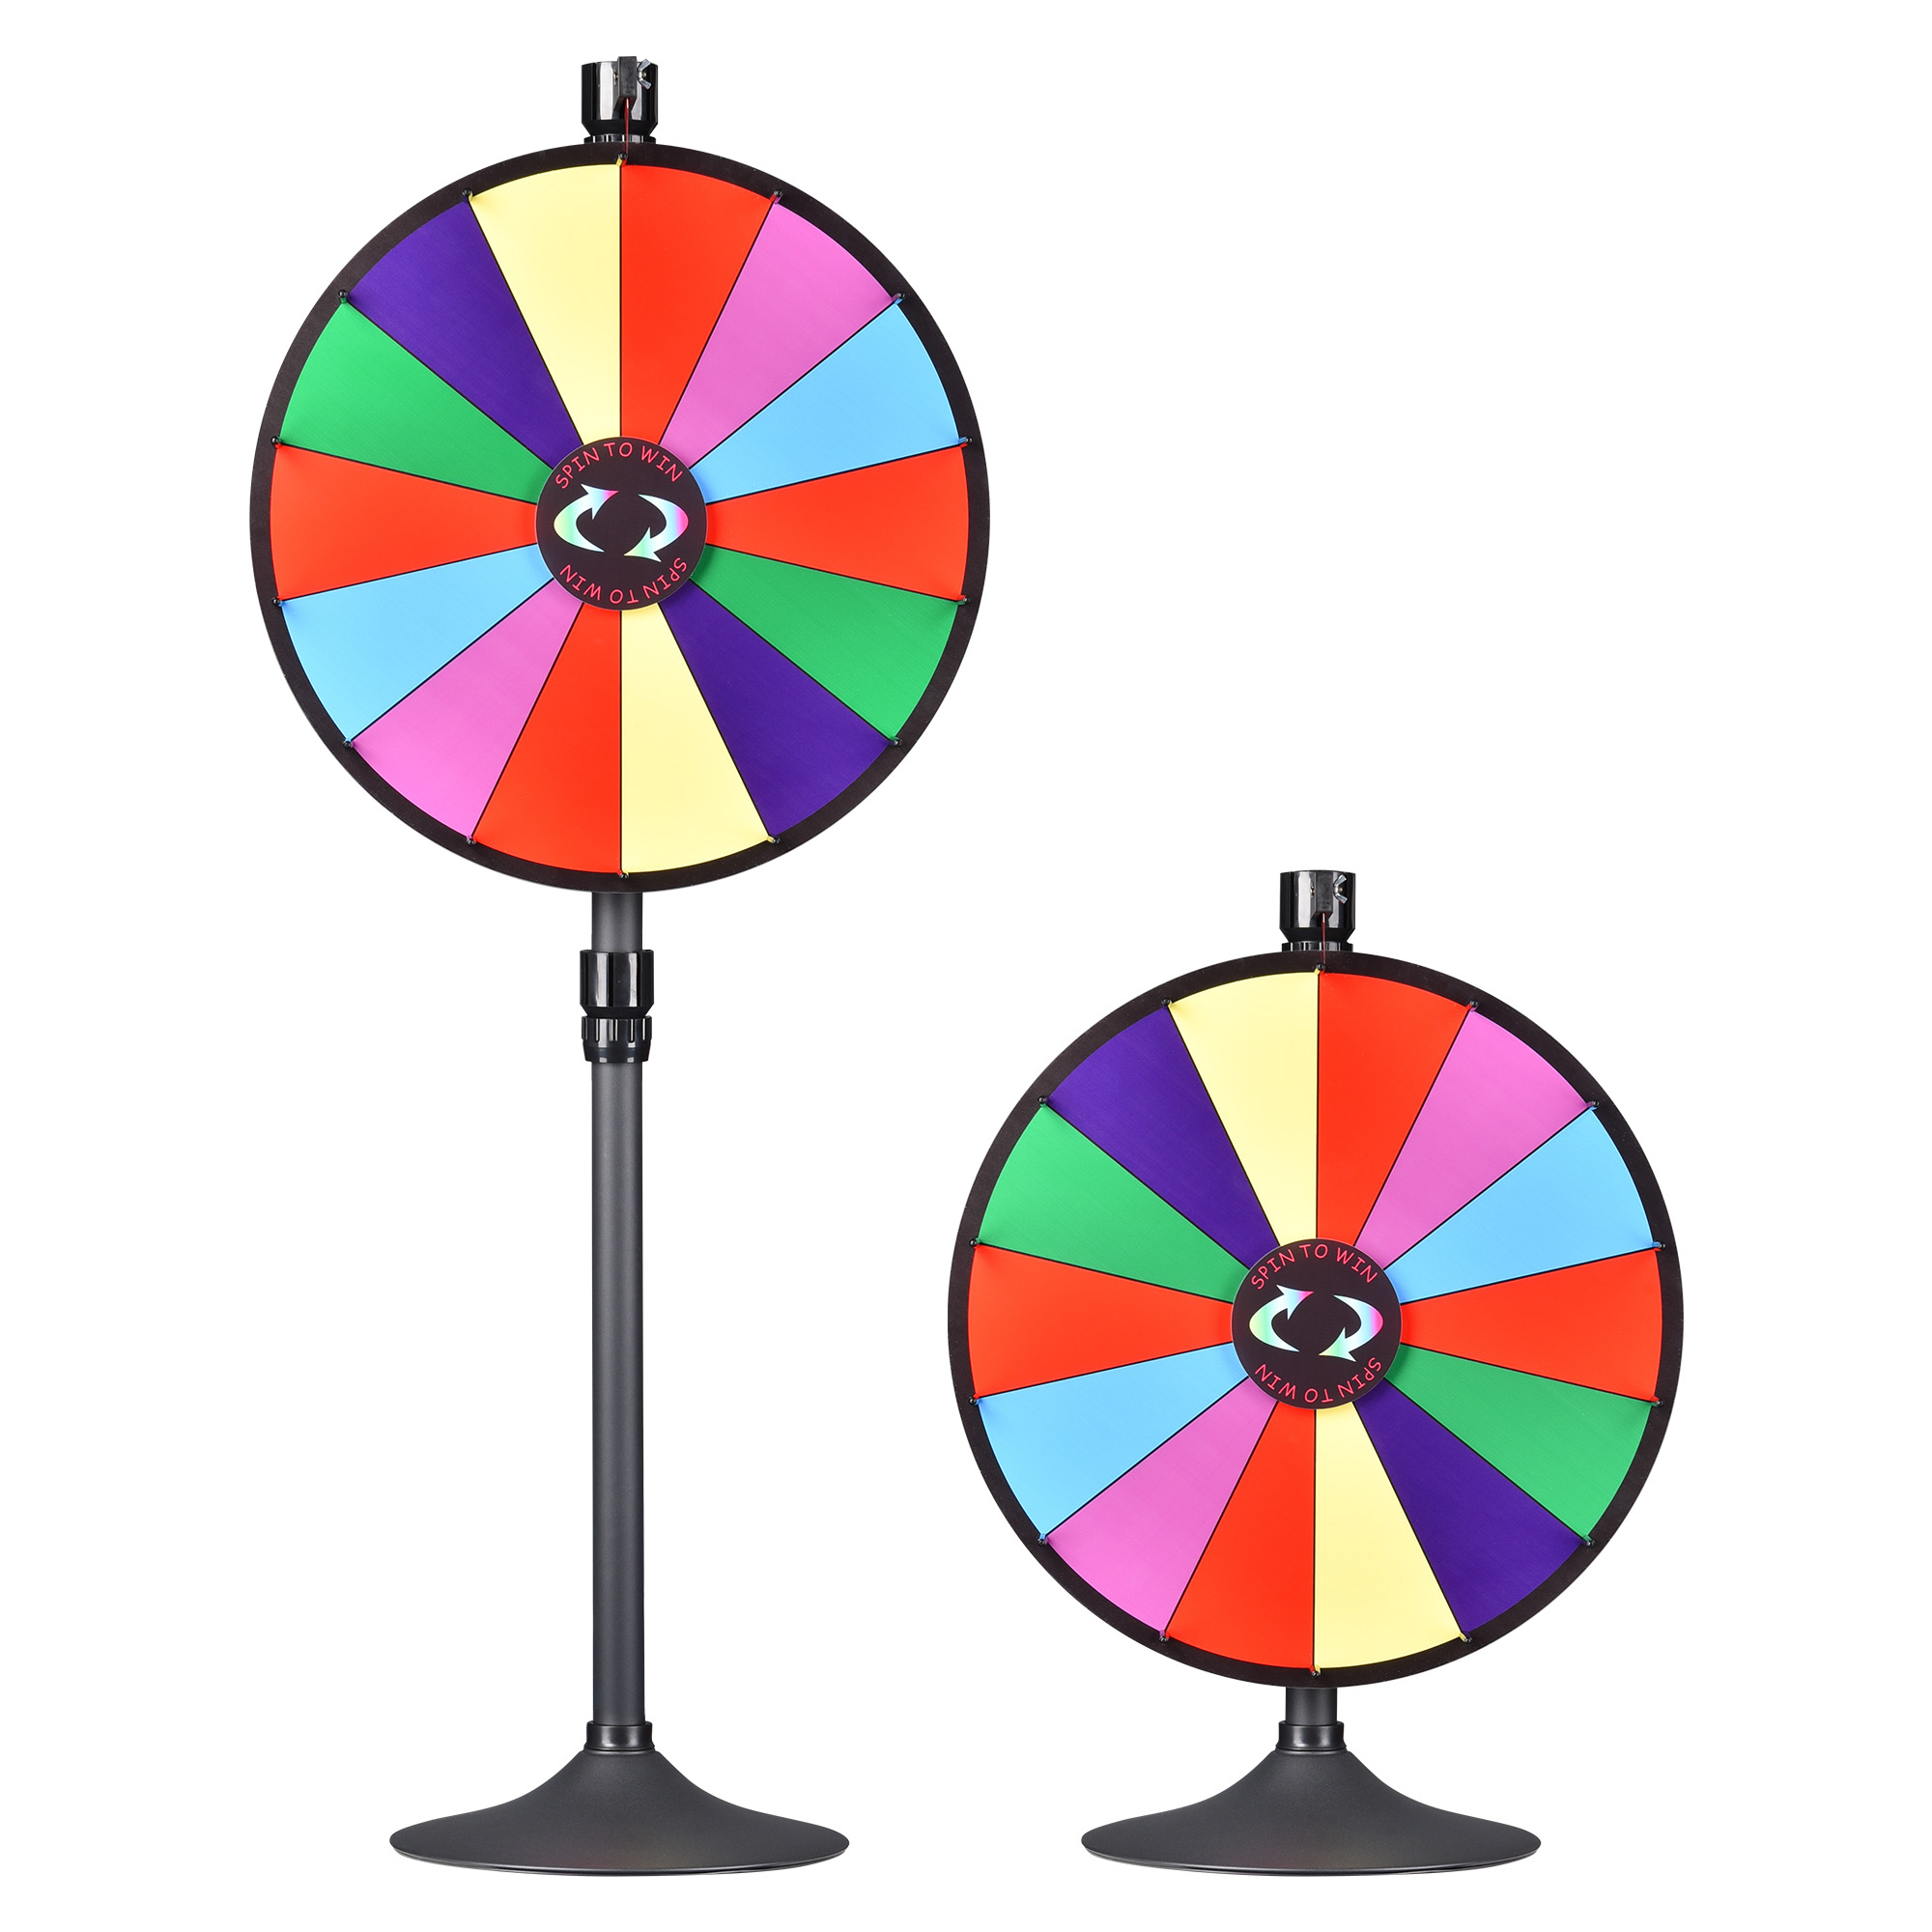 WinSpin 24" Dual Use Prize Wheel Tabletop or Floor Stand Spinning Wheel Carnival Game Tradeshow